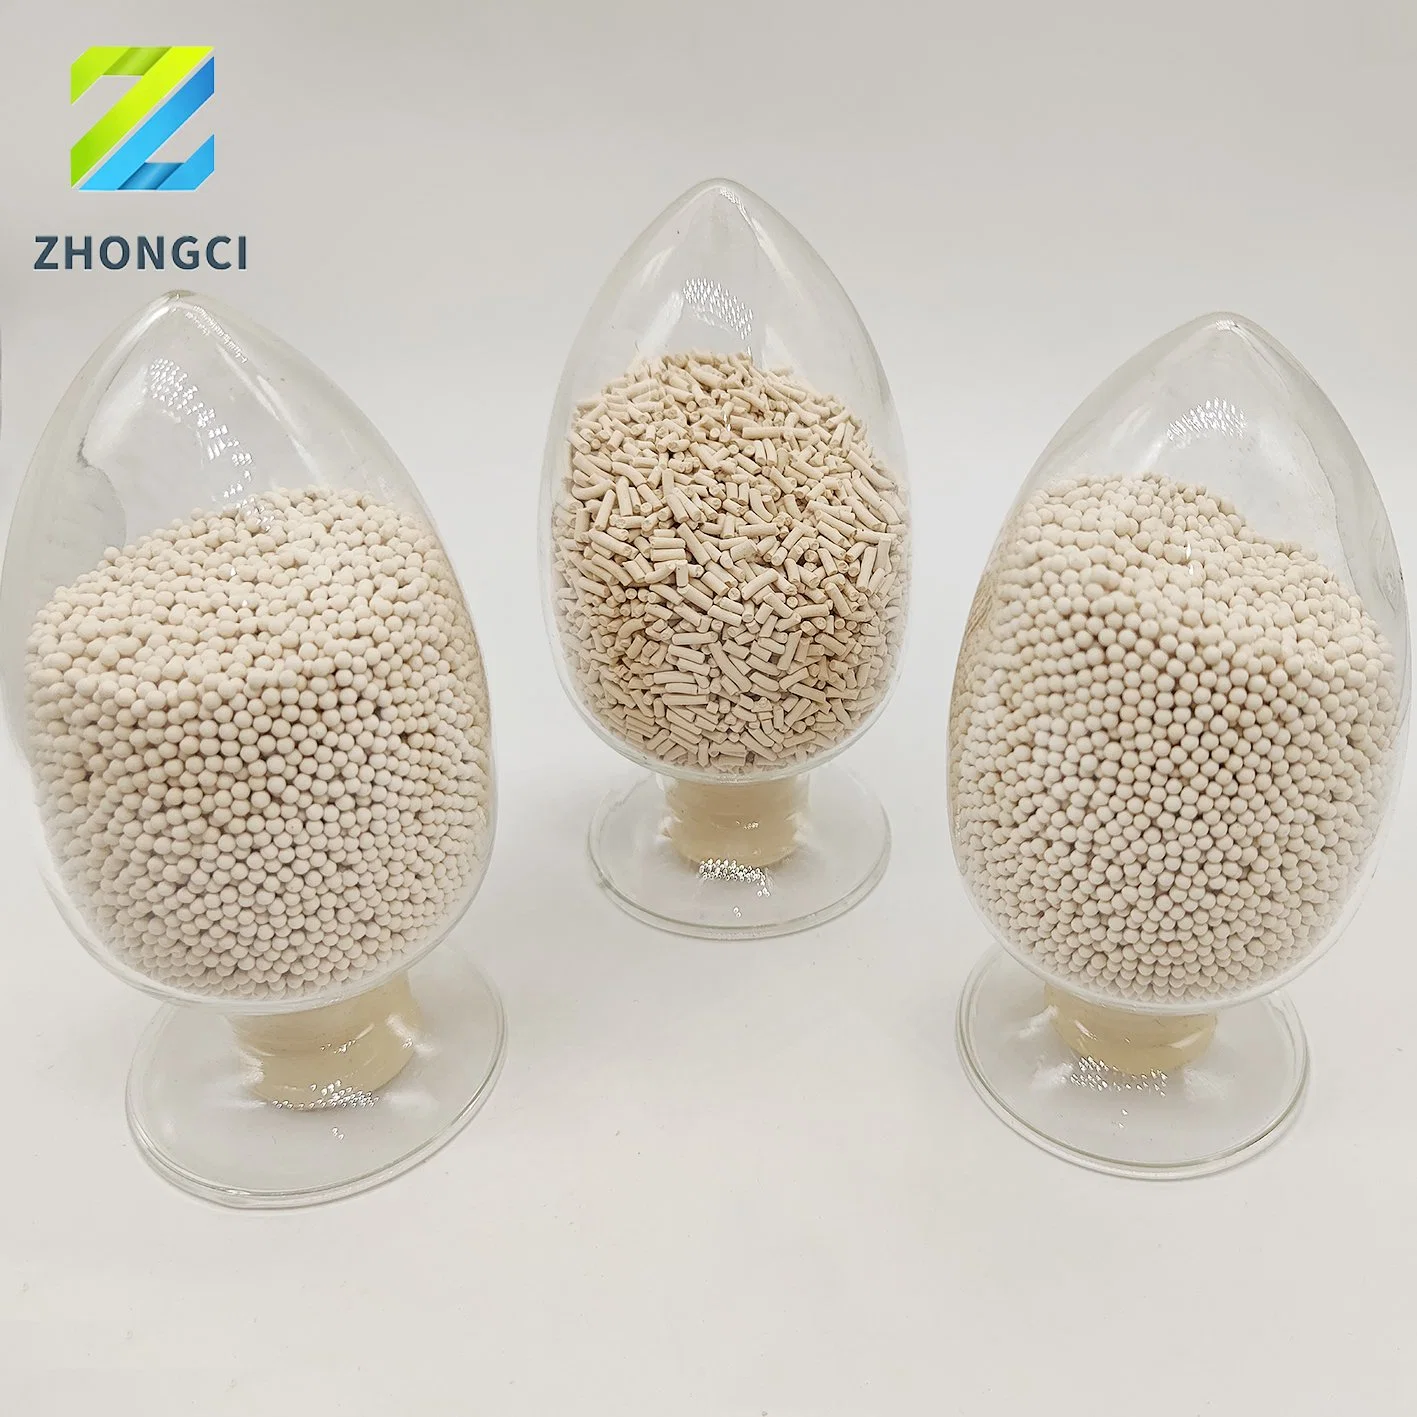 Zhongci 20 Years China Brand High Adsorption Zeolite 4A Molecular Sieve as Desiccant